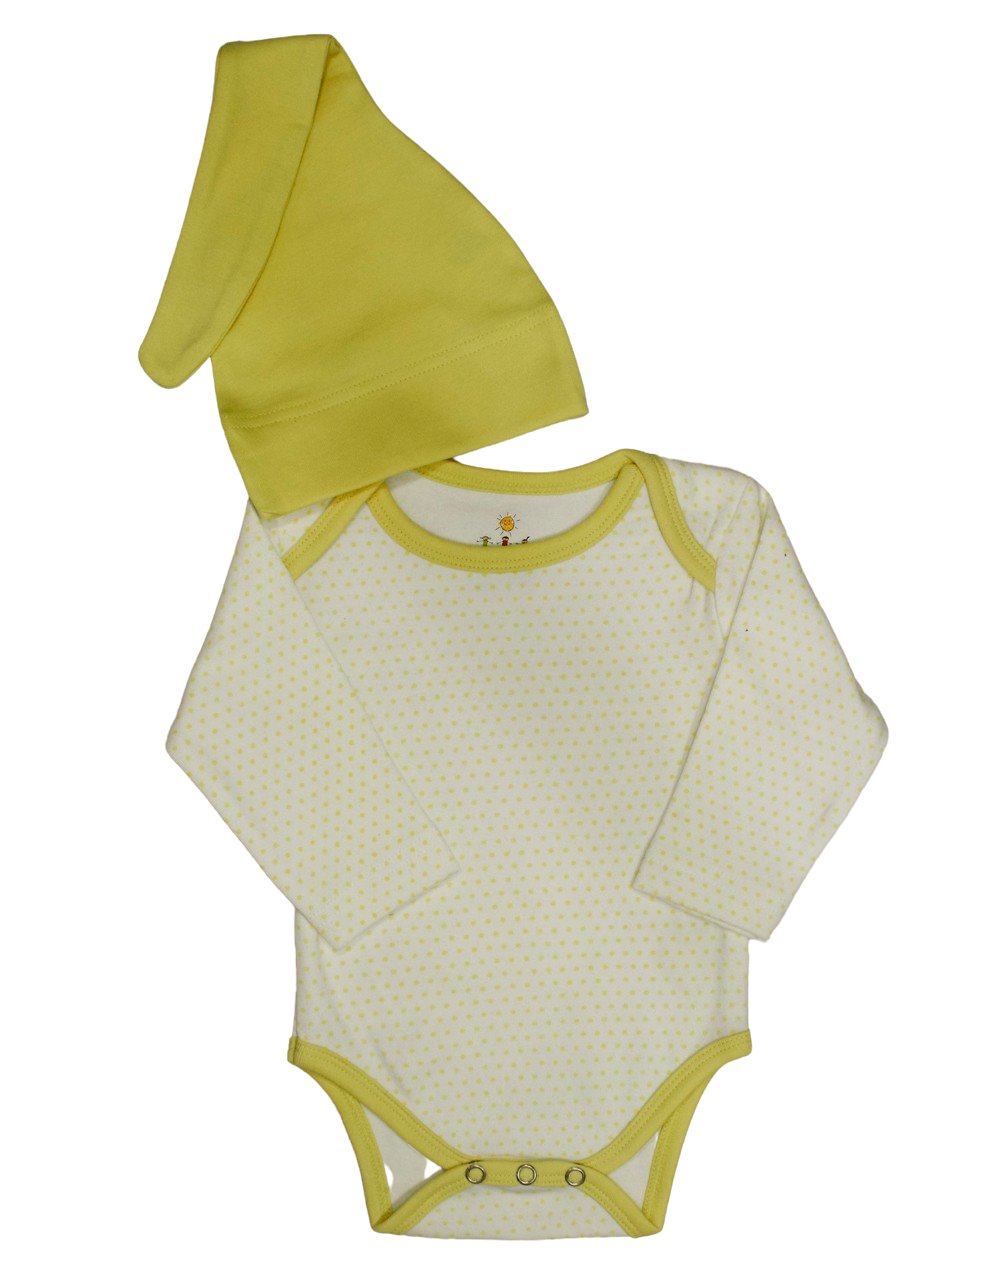 Snap Long Sleeve Body Suit &amp; Hat- Available in 4 Colors Baby Clothes Passion Lilie 